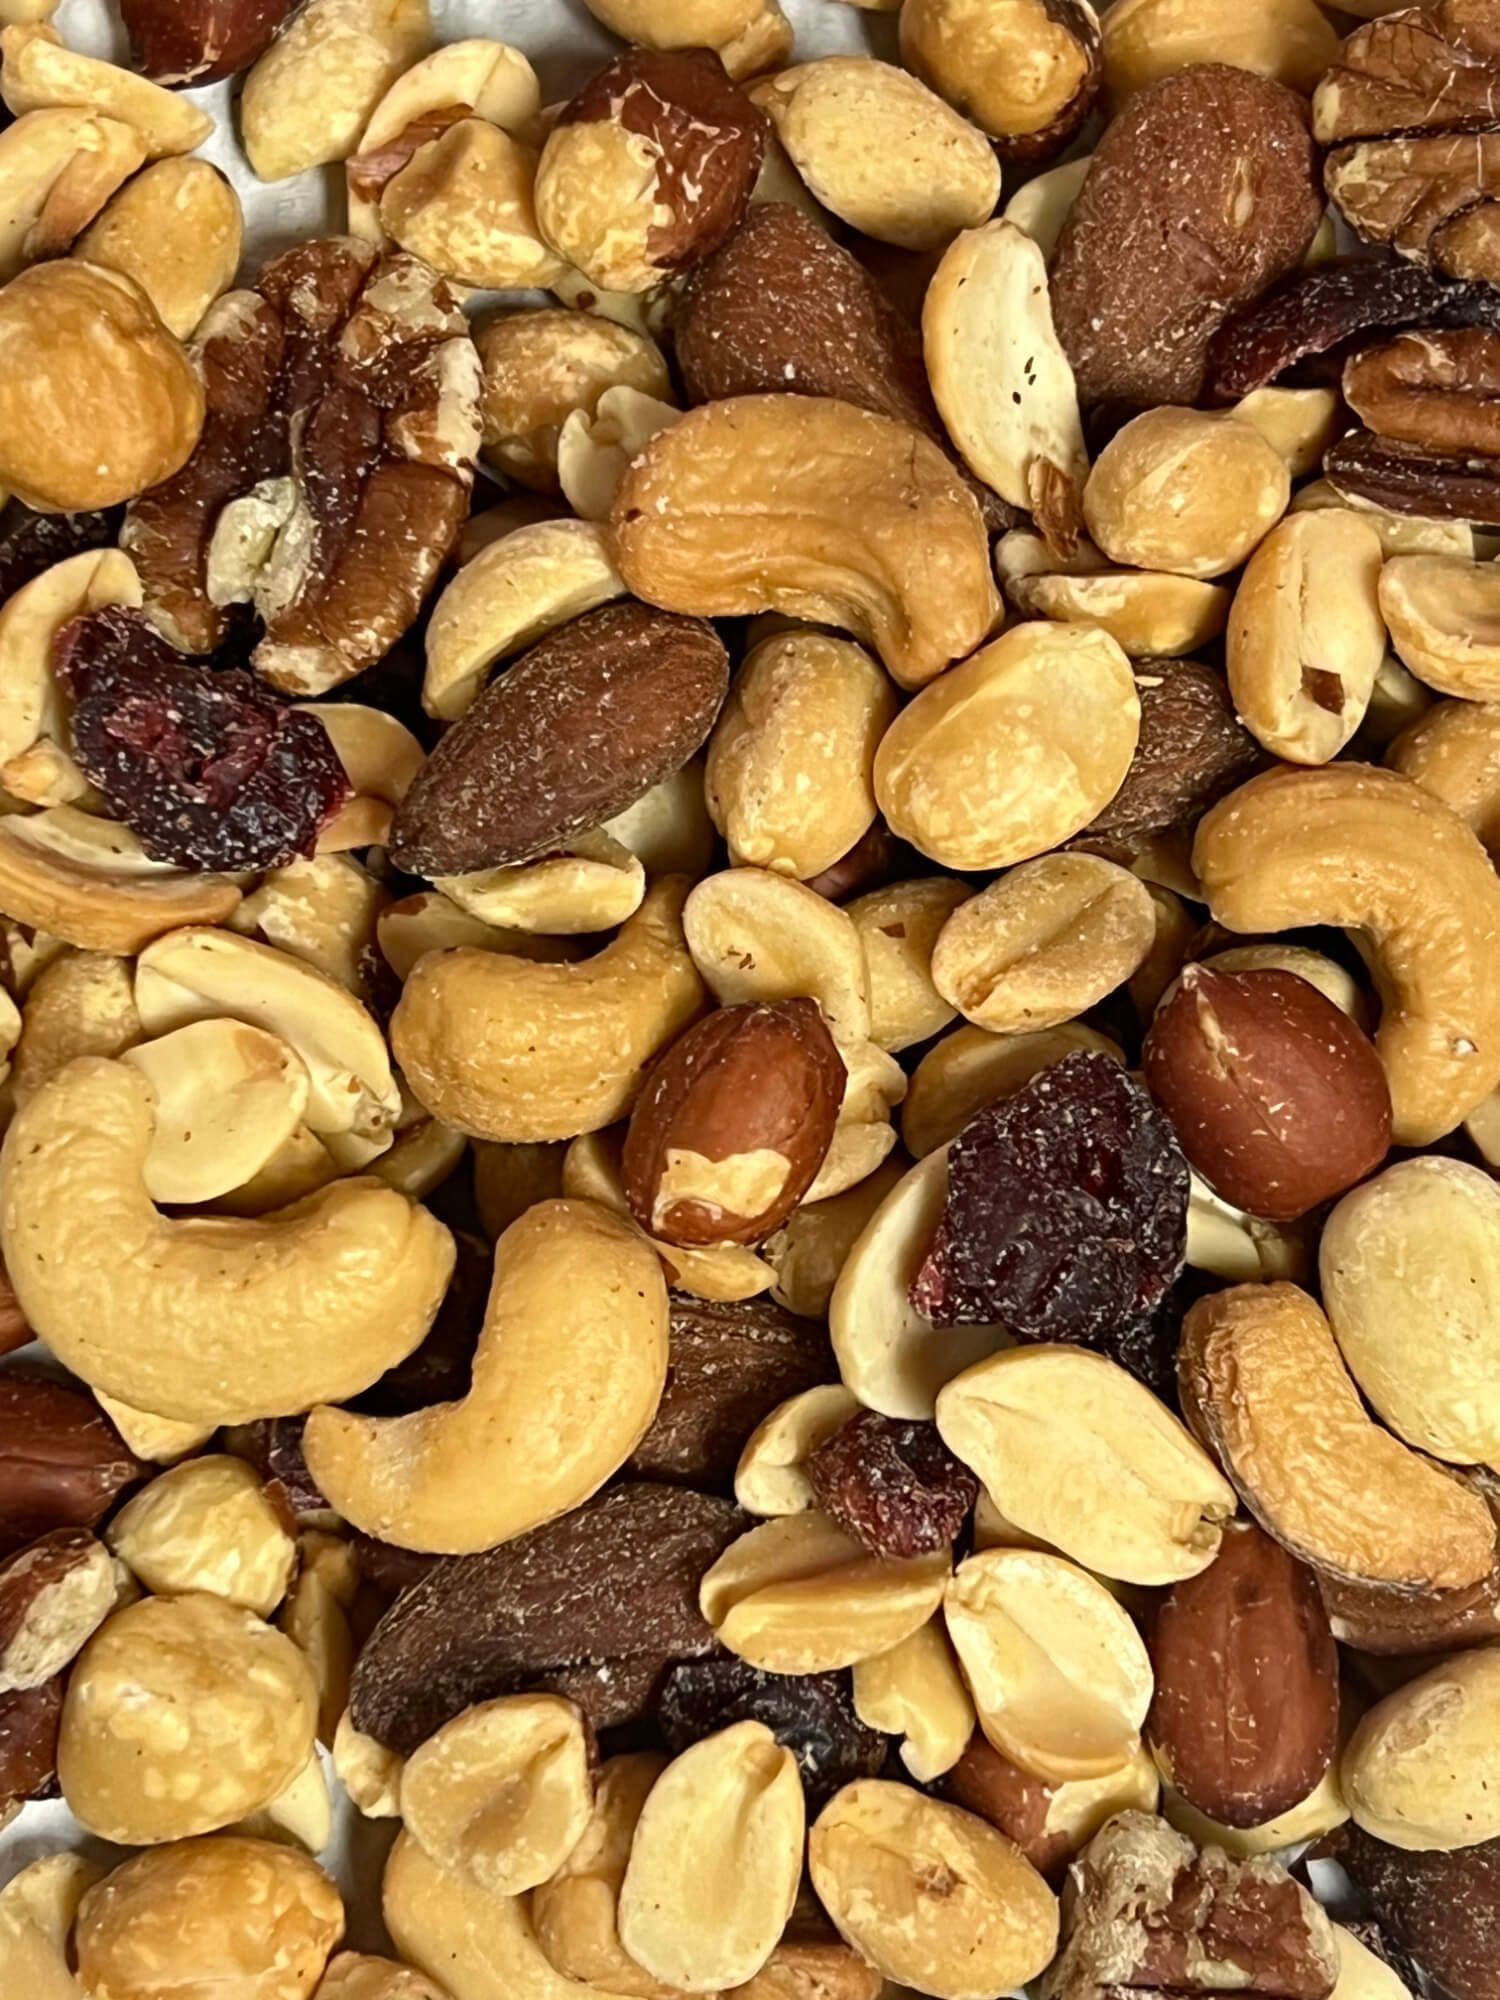 A close up of a pile of nuts and cranberries on a table.